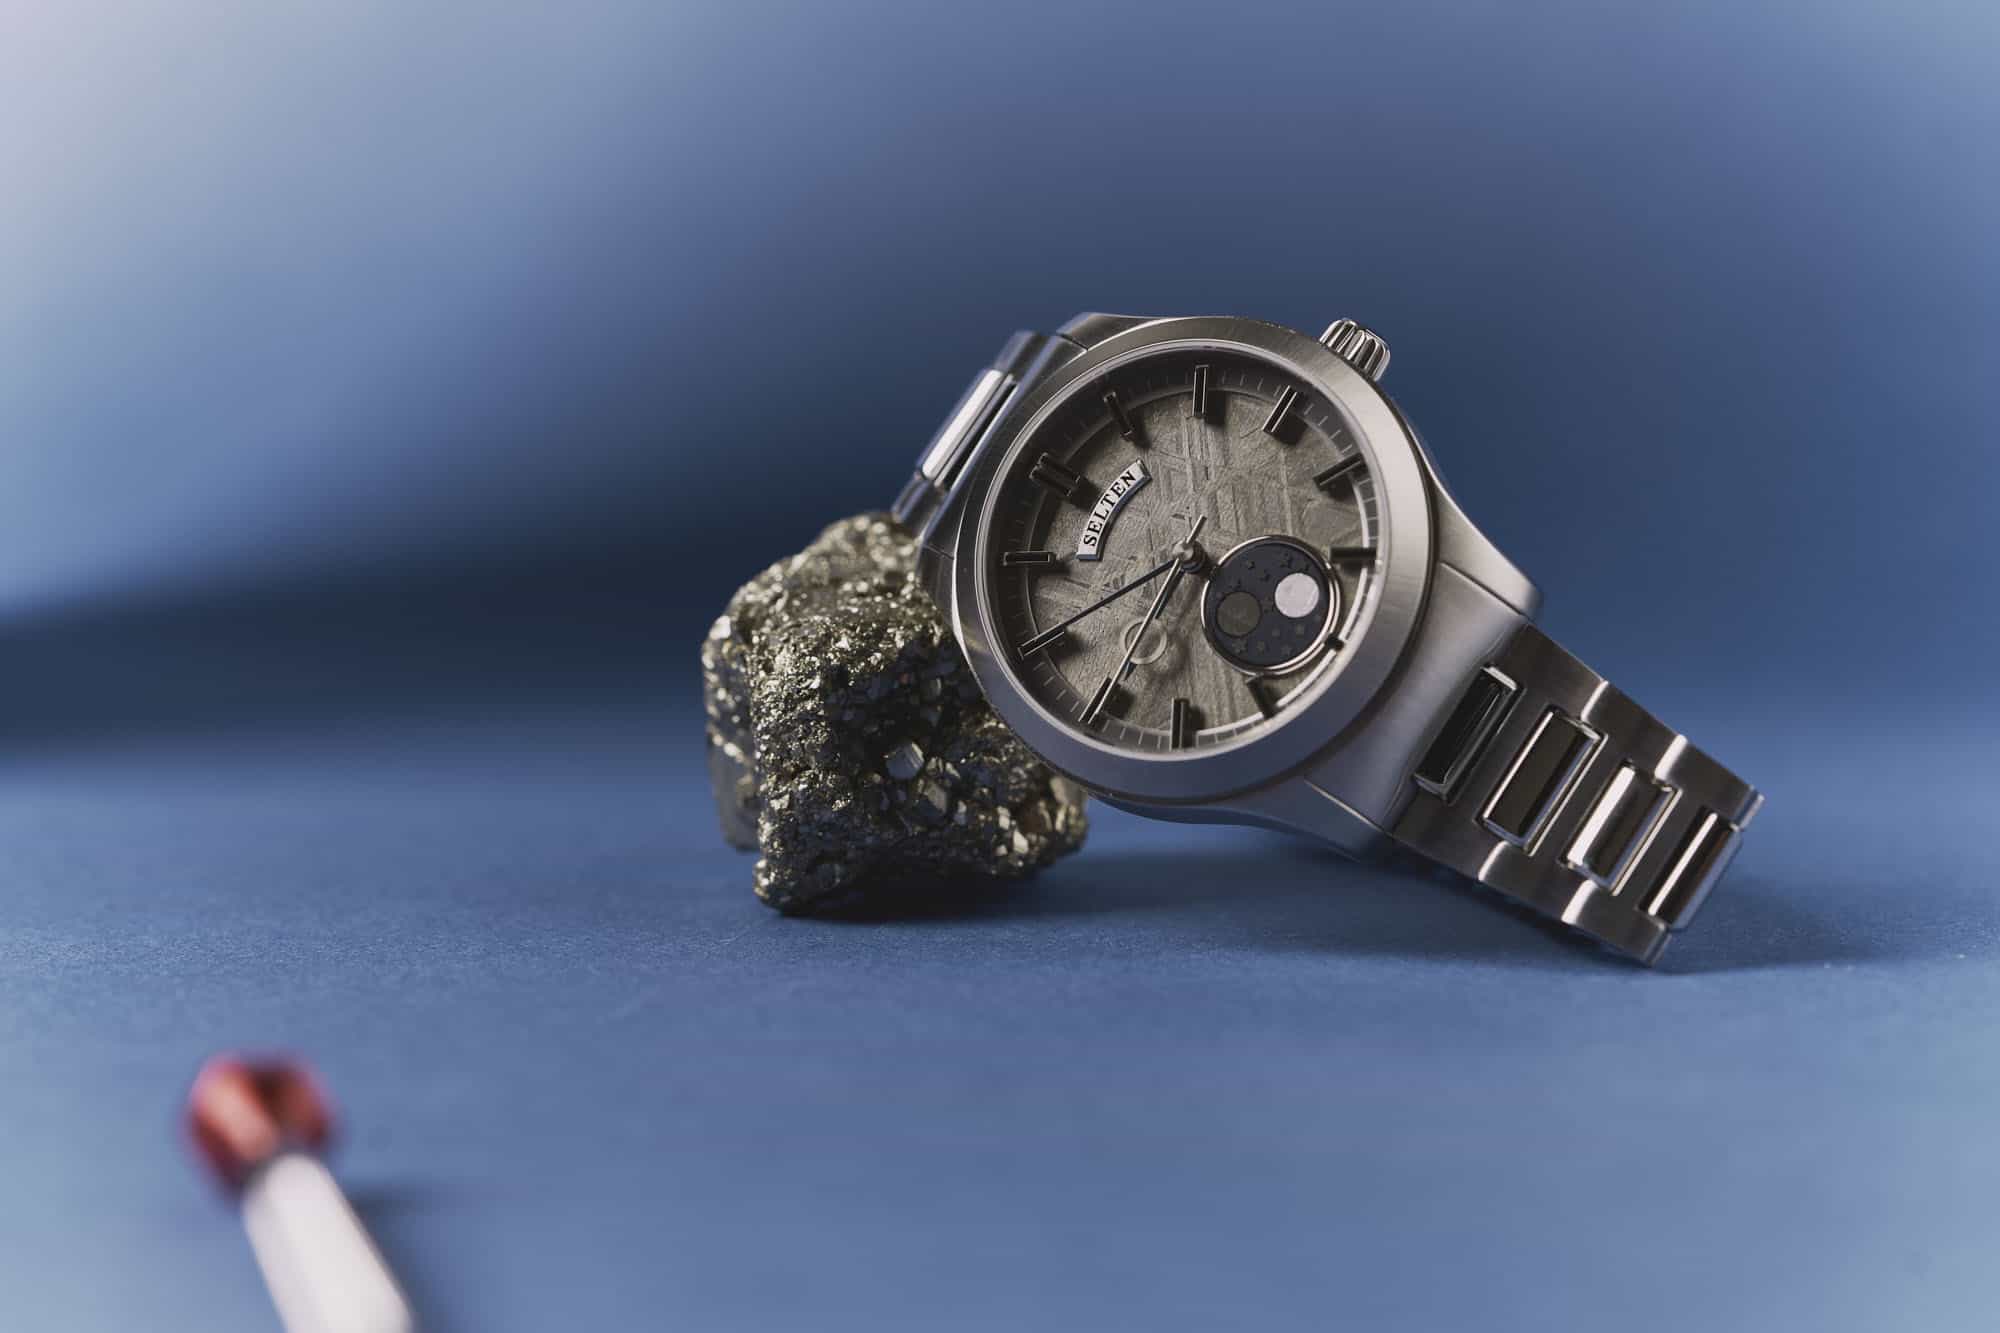 The Most Crowdfunded Luxury Watch Company Ever Is Running a Rare